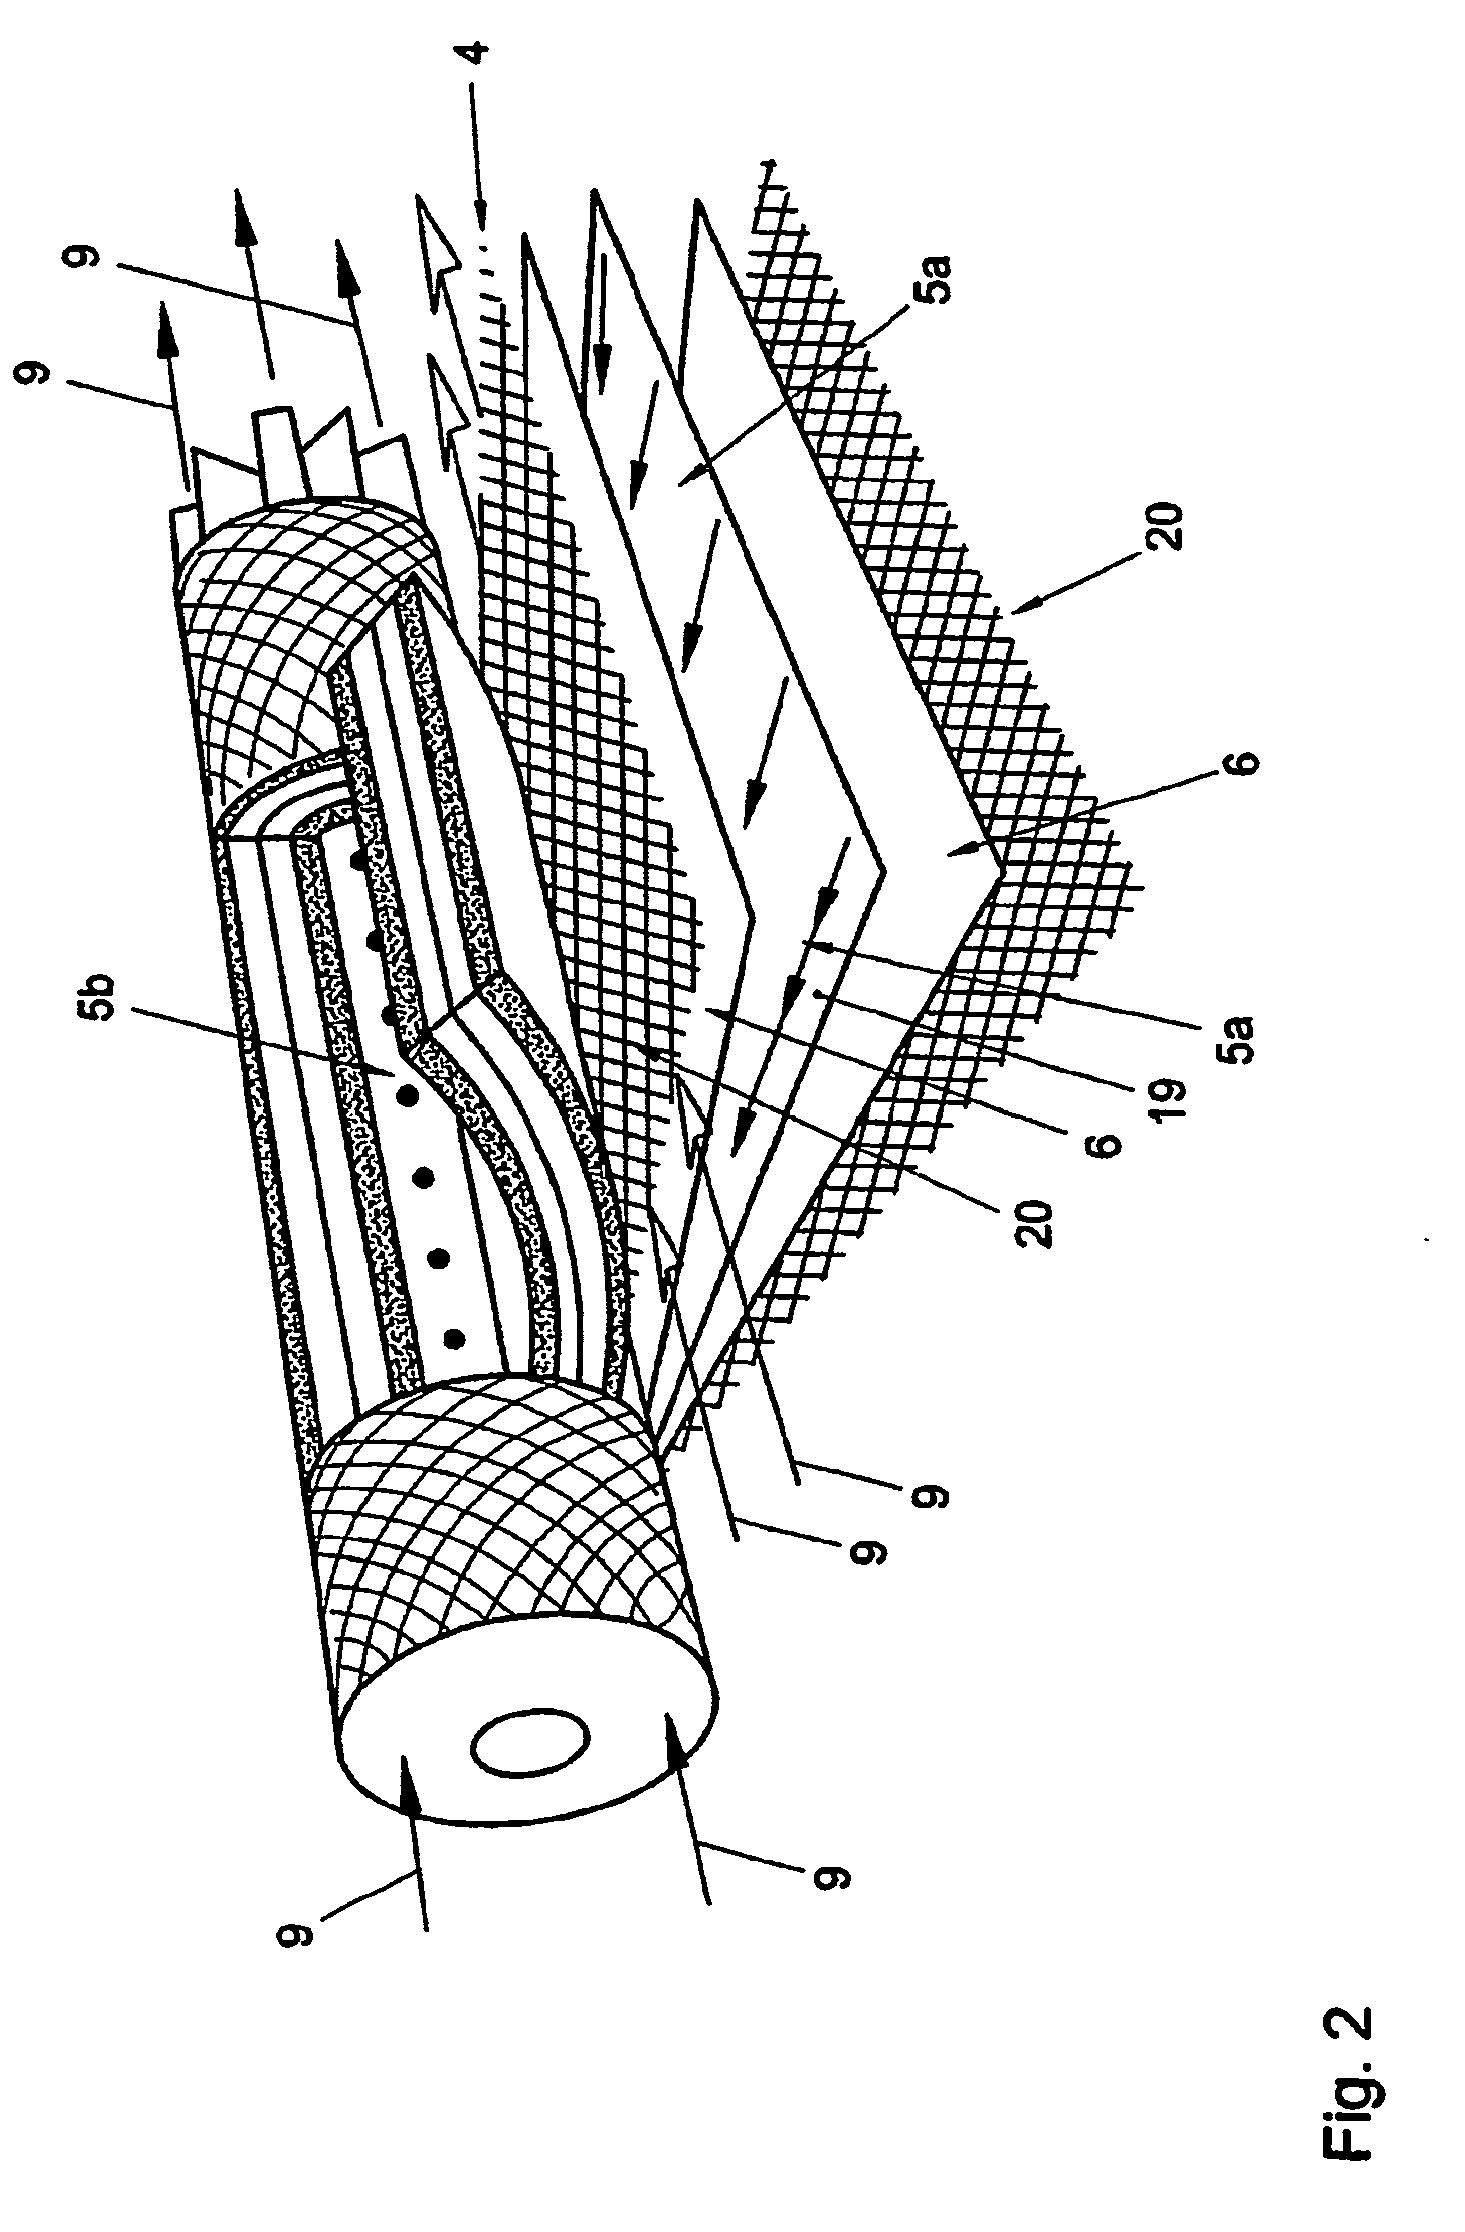 Anti-telescoping device for spiral wound membranes